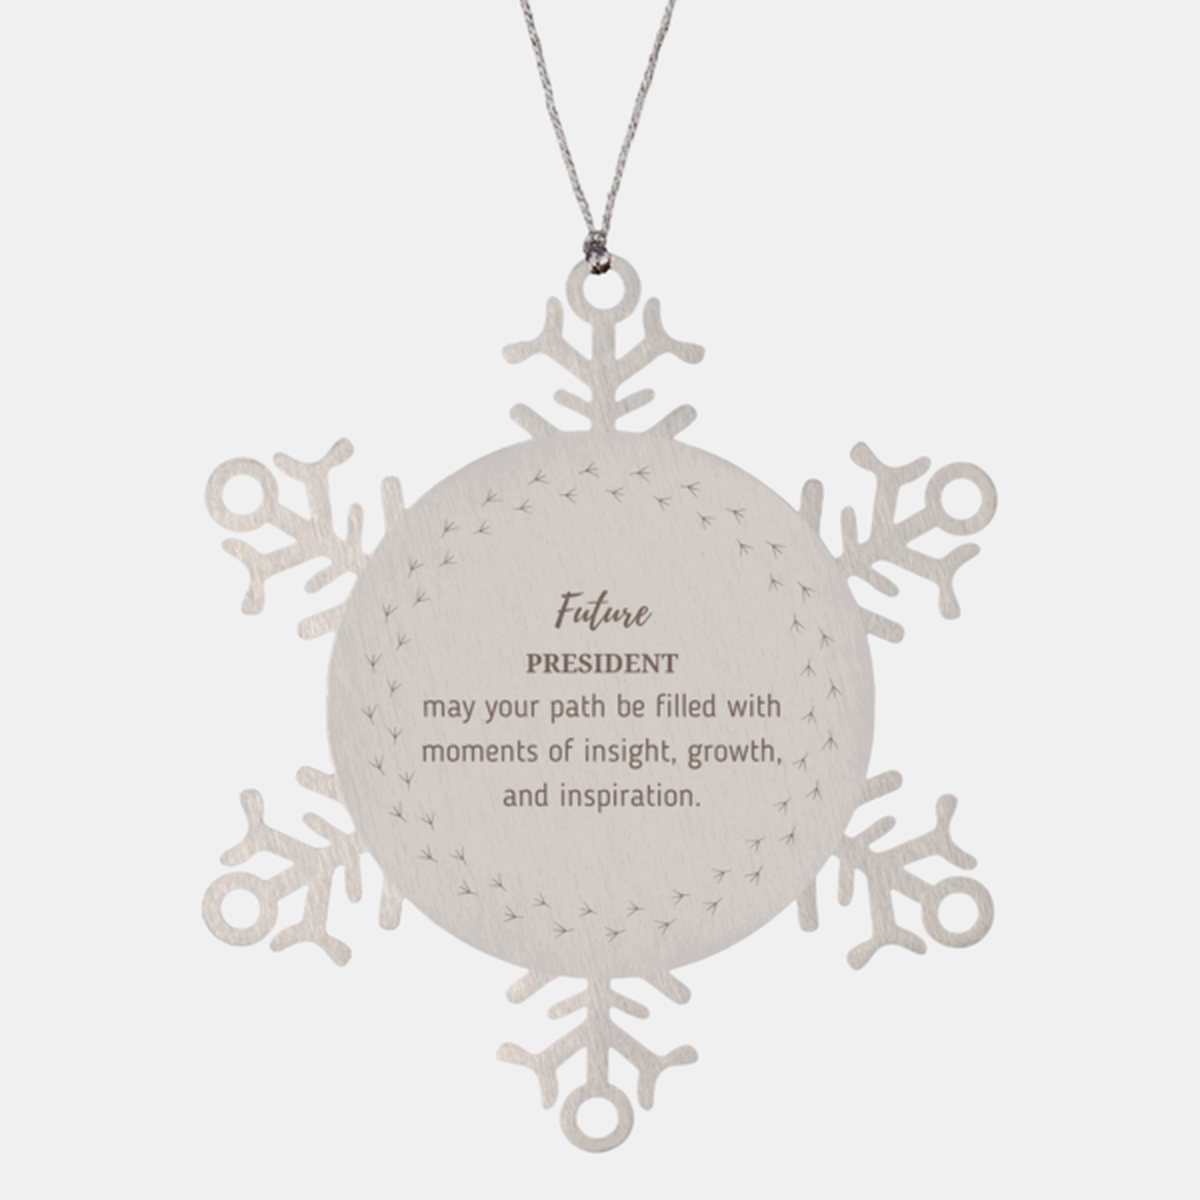 Future President Gifts, May your path be filled with moments of insight, Graduation Gifts for New President, Christmas Unique Snowflake Ornament For Men, Women, Friends